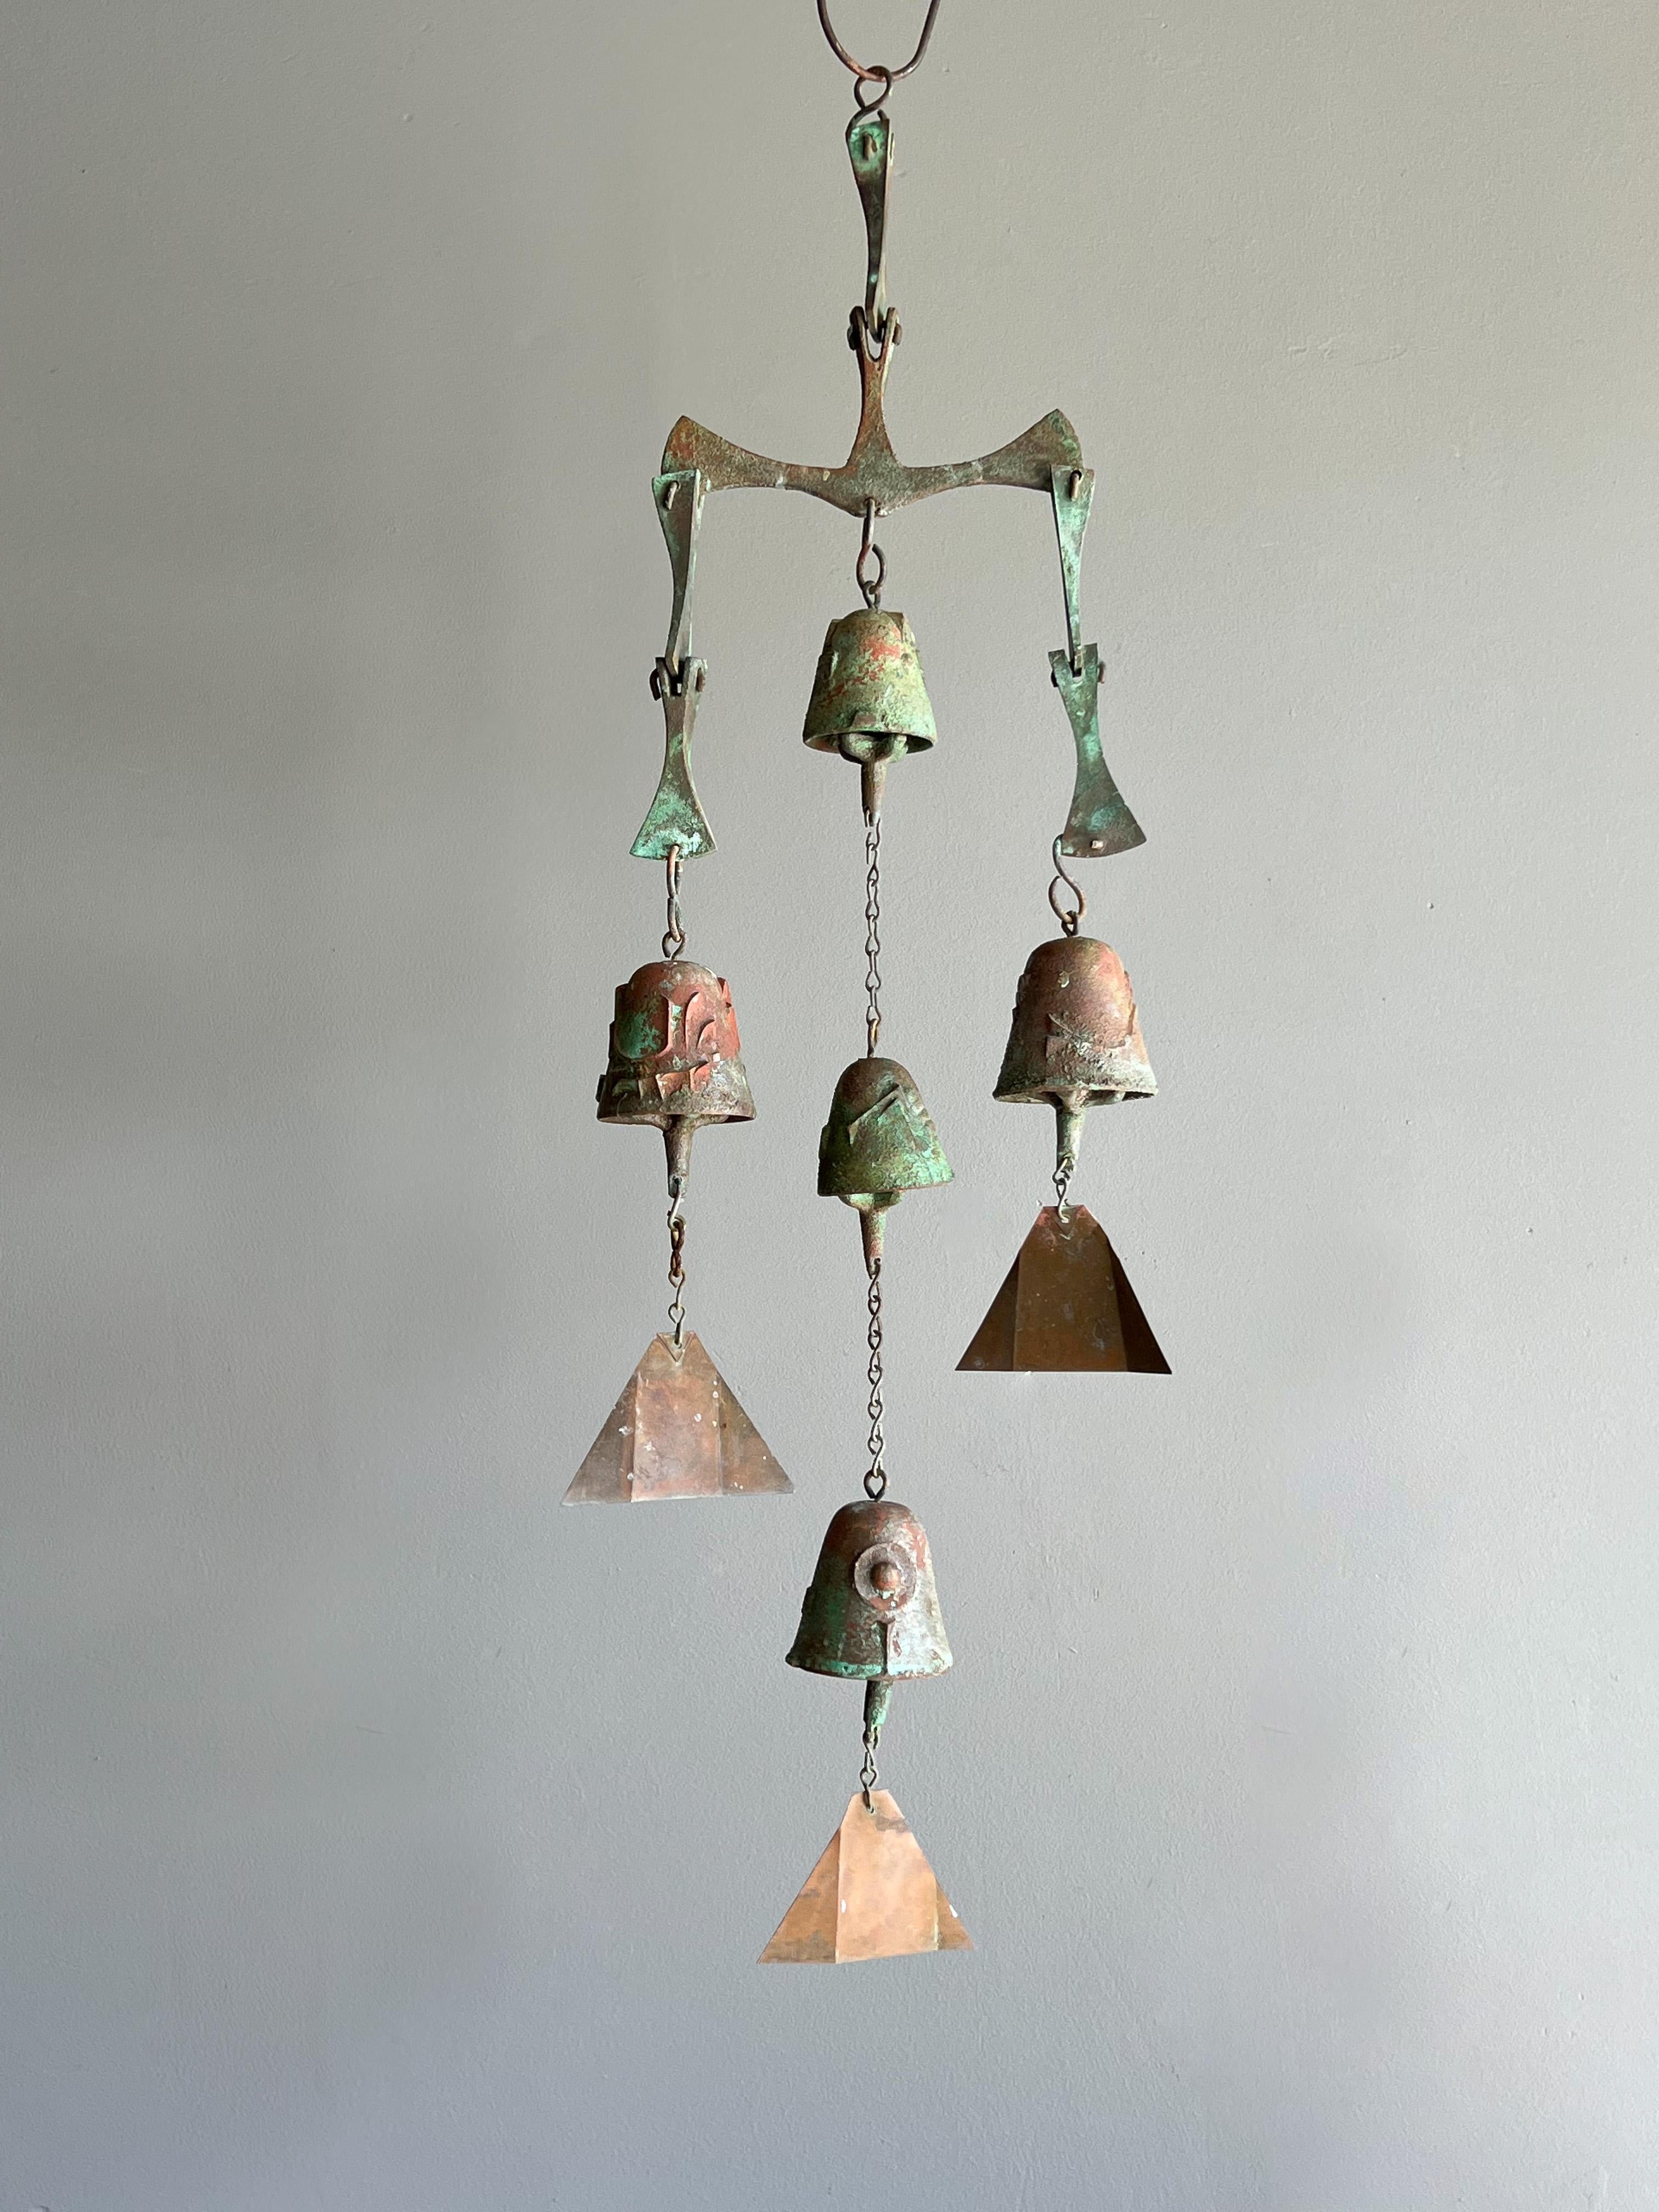 Beautiful and early wind chime / bell designed by architect Paolo Soleri for Arcosanti. This example features three arms and five bells in total. 

Constructed of casted bronze elements showing a lovely environmental and natural age verdigris